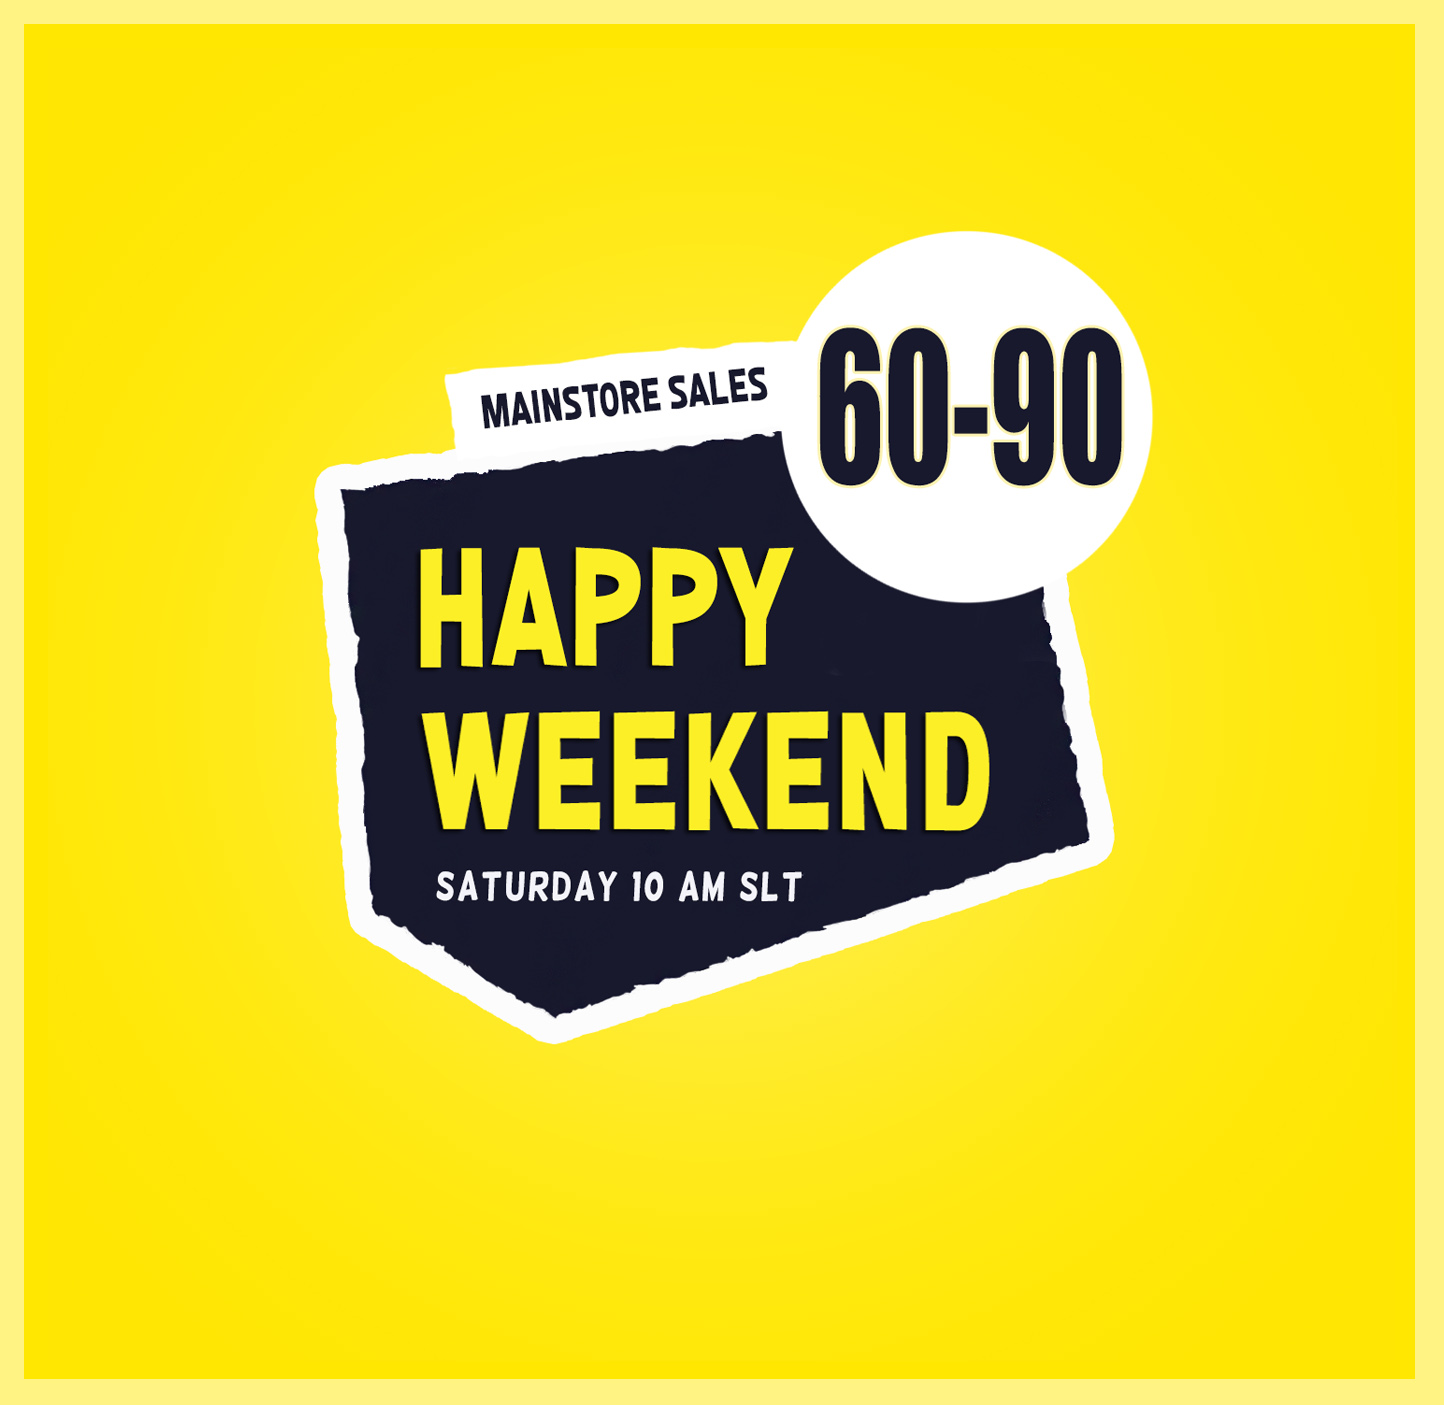 FEEL GOOD VIBES ABOUND WITH THE HAPPY WEEKEND SALE